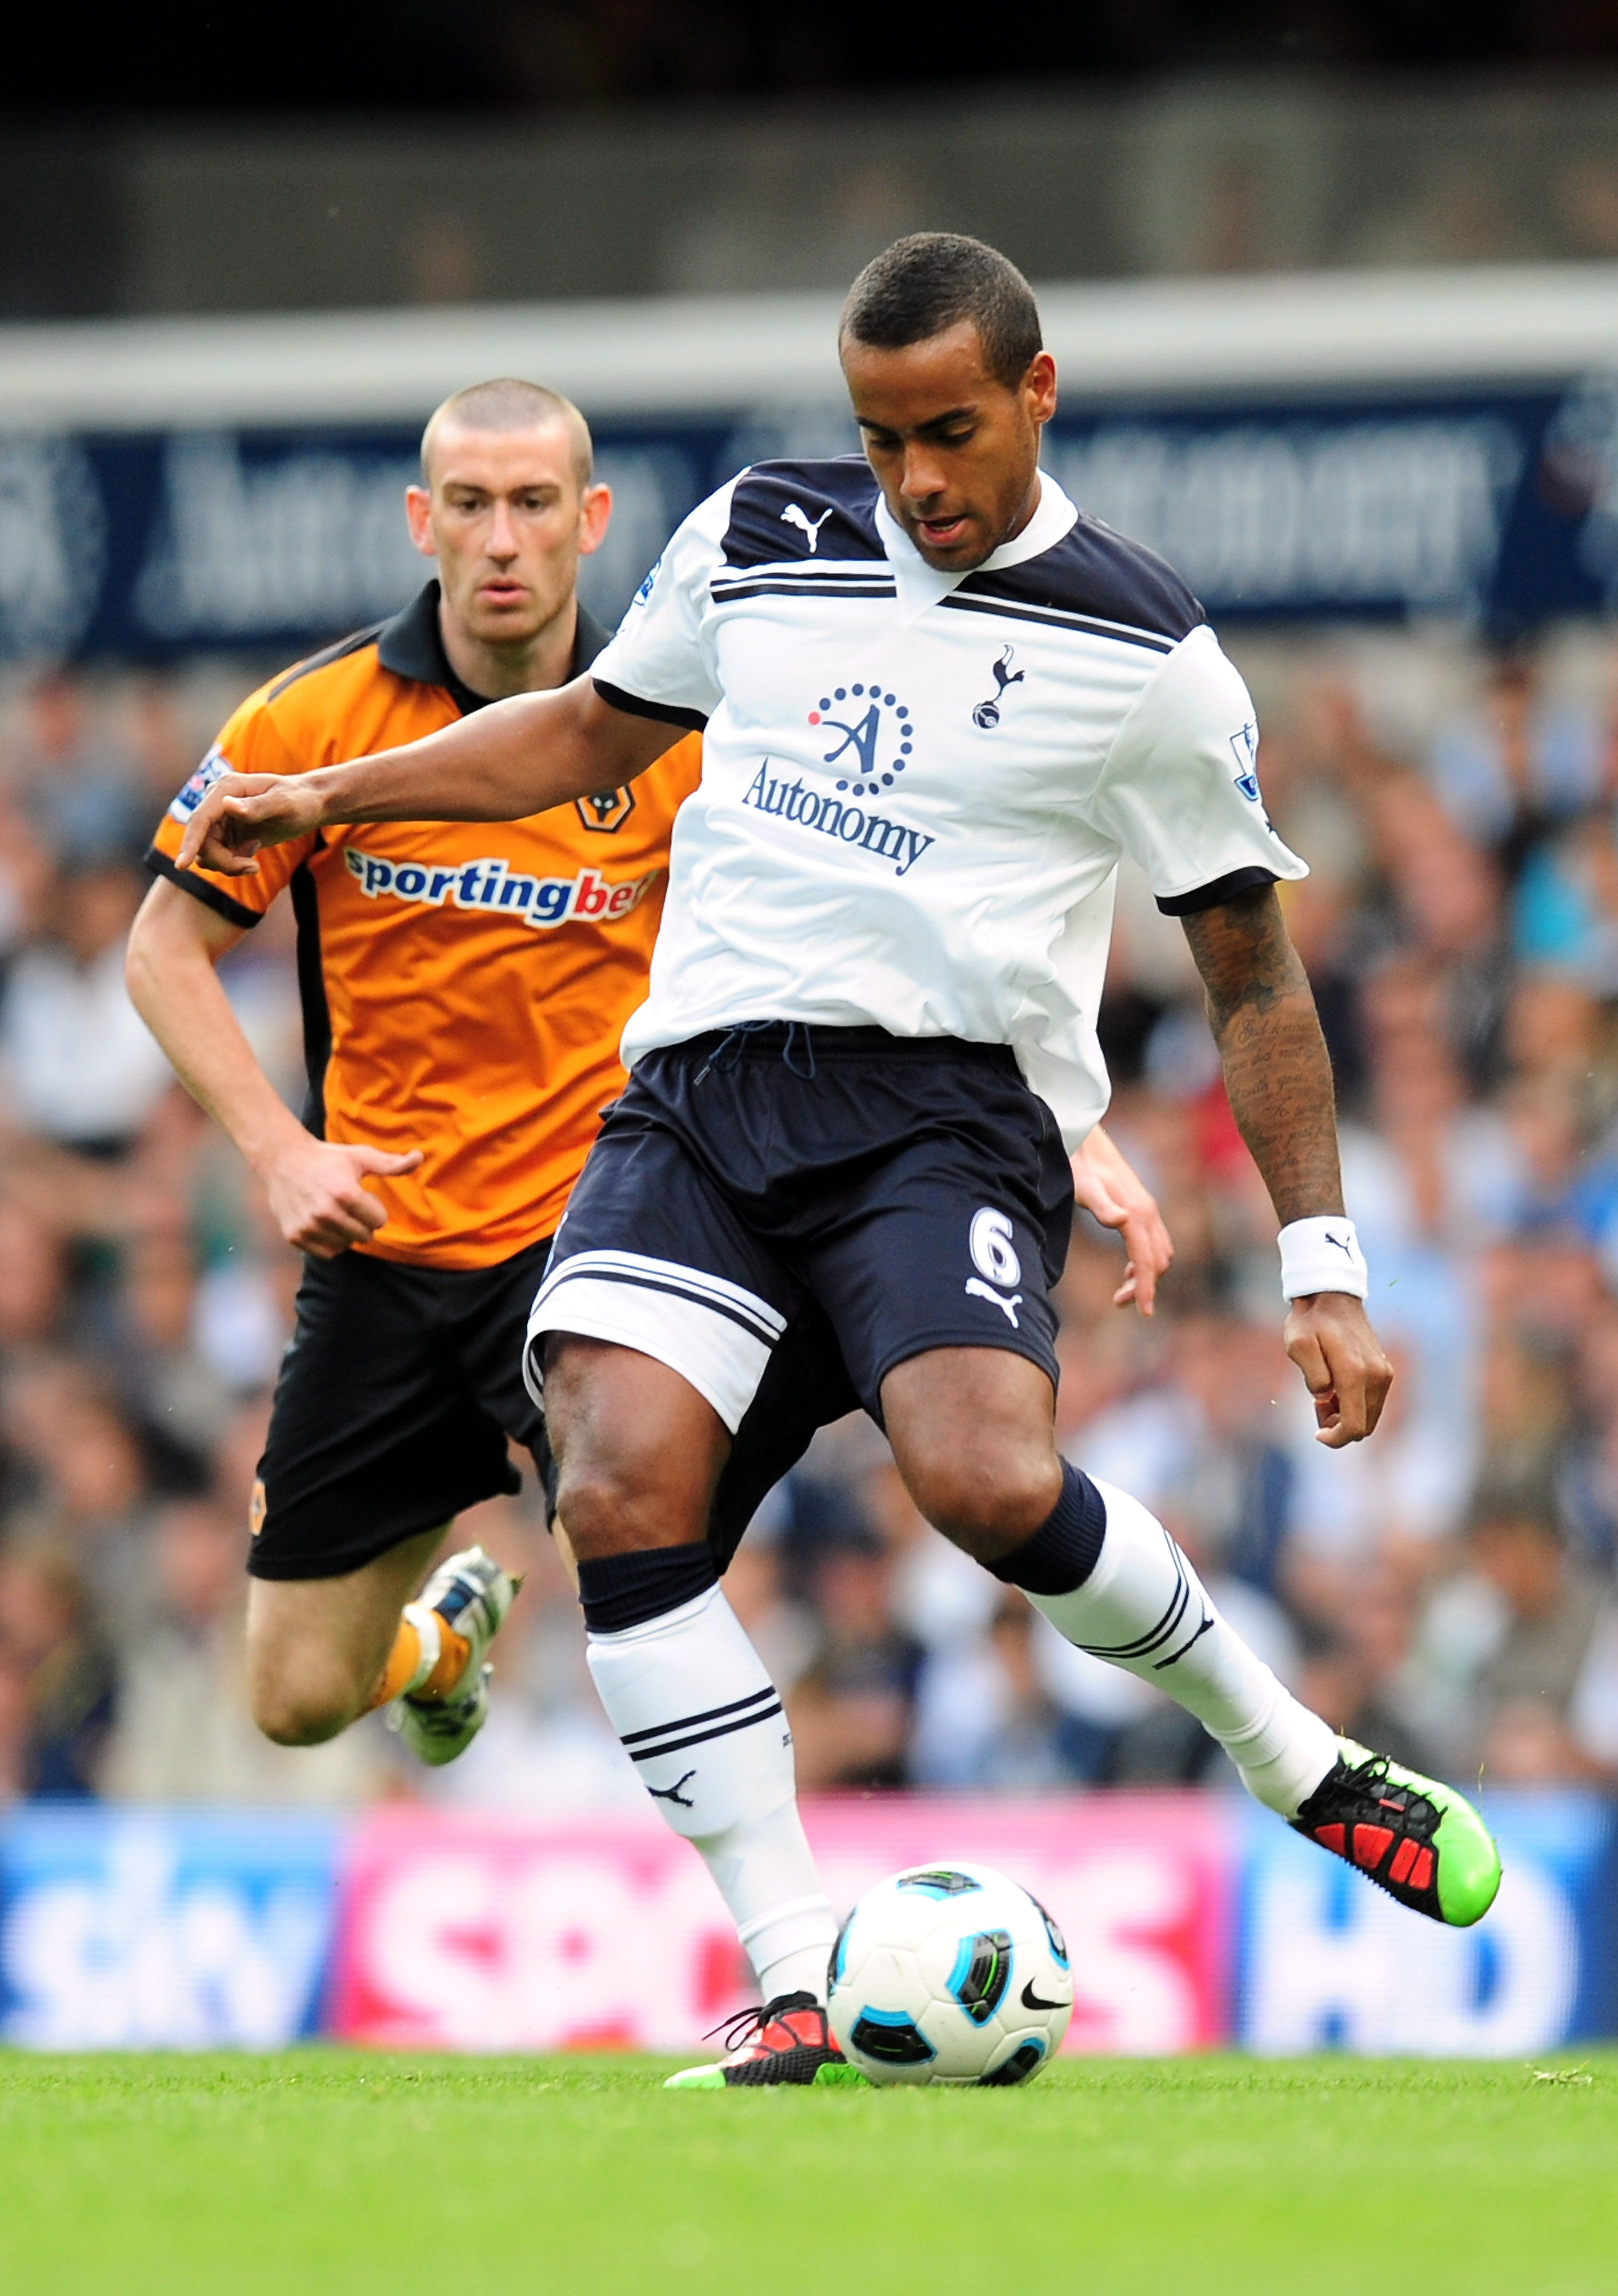 LONDON, ENGLAND - SEPTEMBER 18:  Tom Huddlestone of Spurs passes the ball during the Barclays Premier League match between Tottenham Hotspur and Wolverhampton Wanderers at White Hart Lane on September 18, 2010 in London, England.  (Photo by Mike Hewitt/Ge